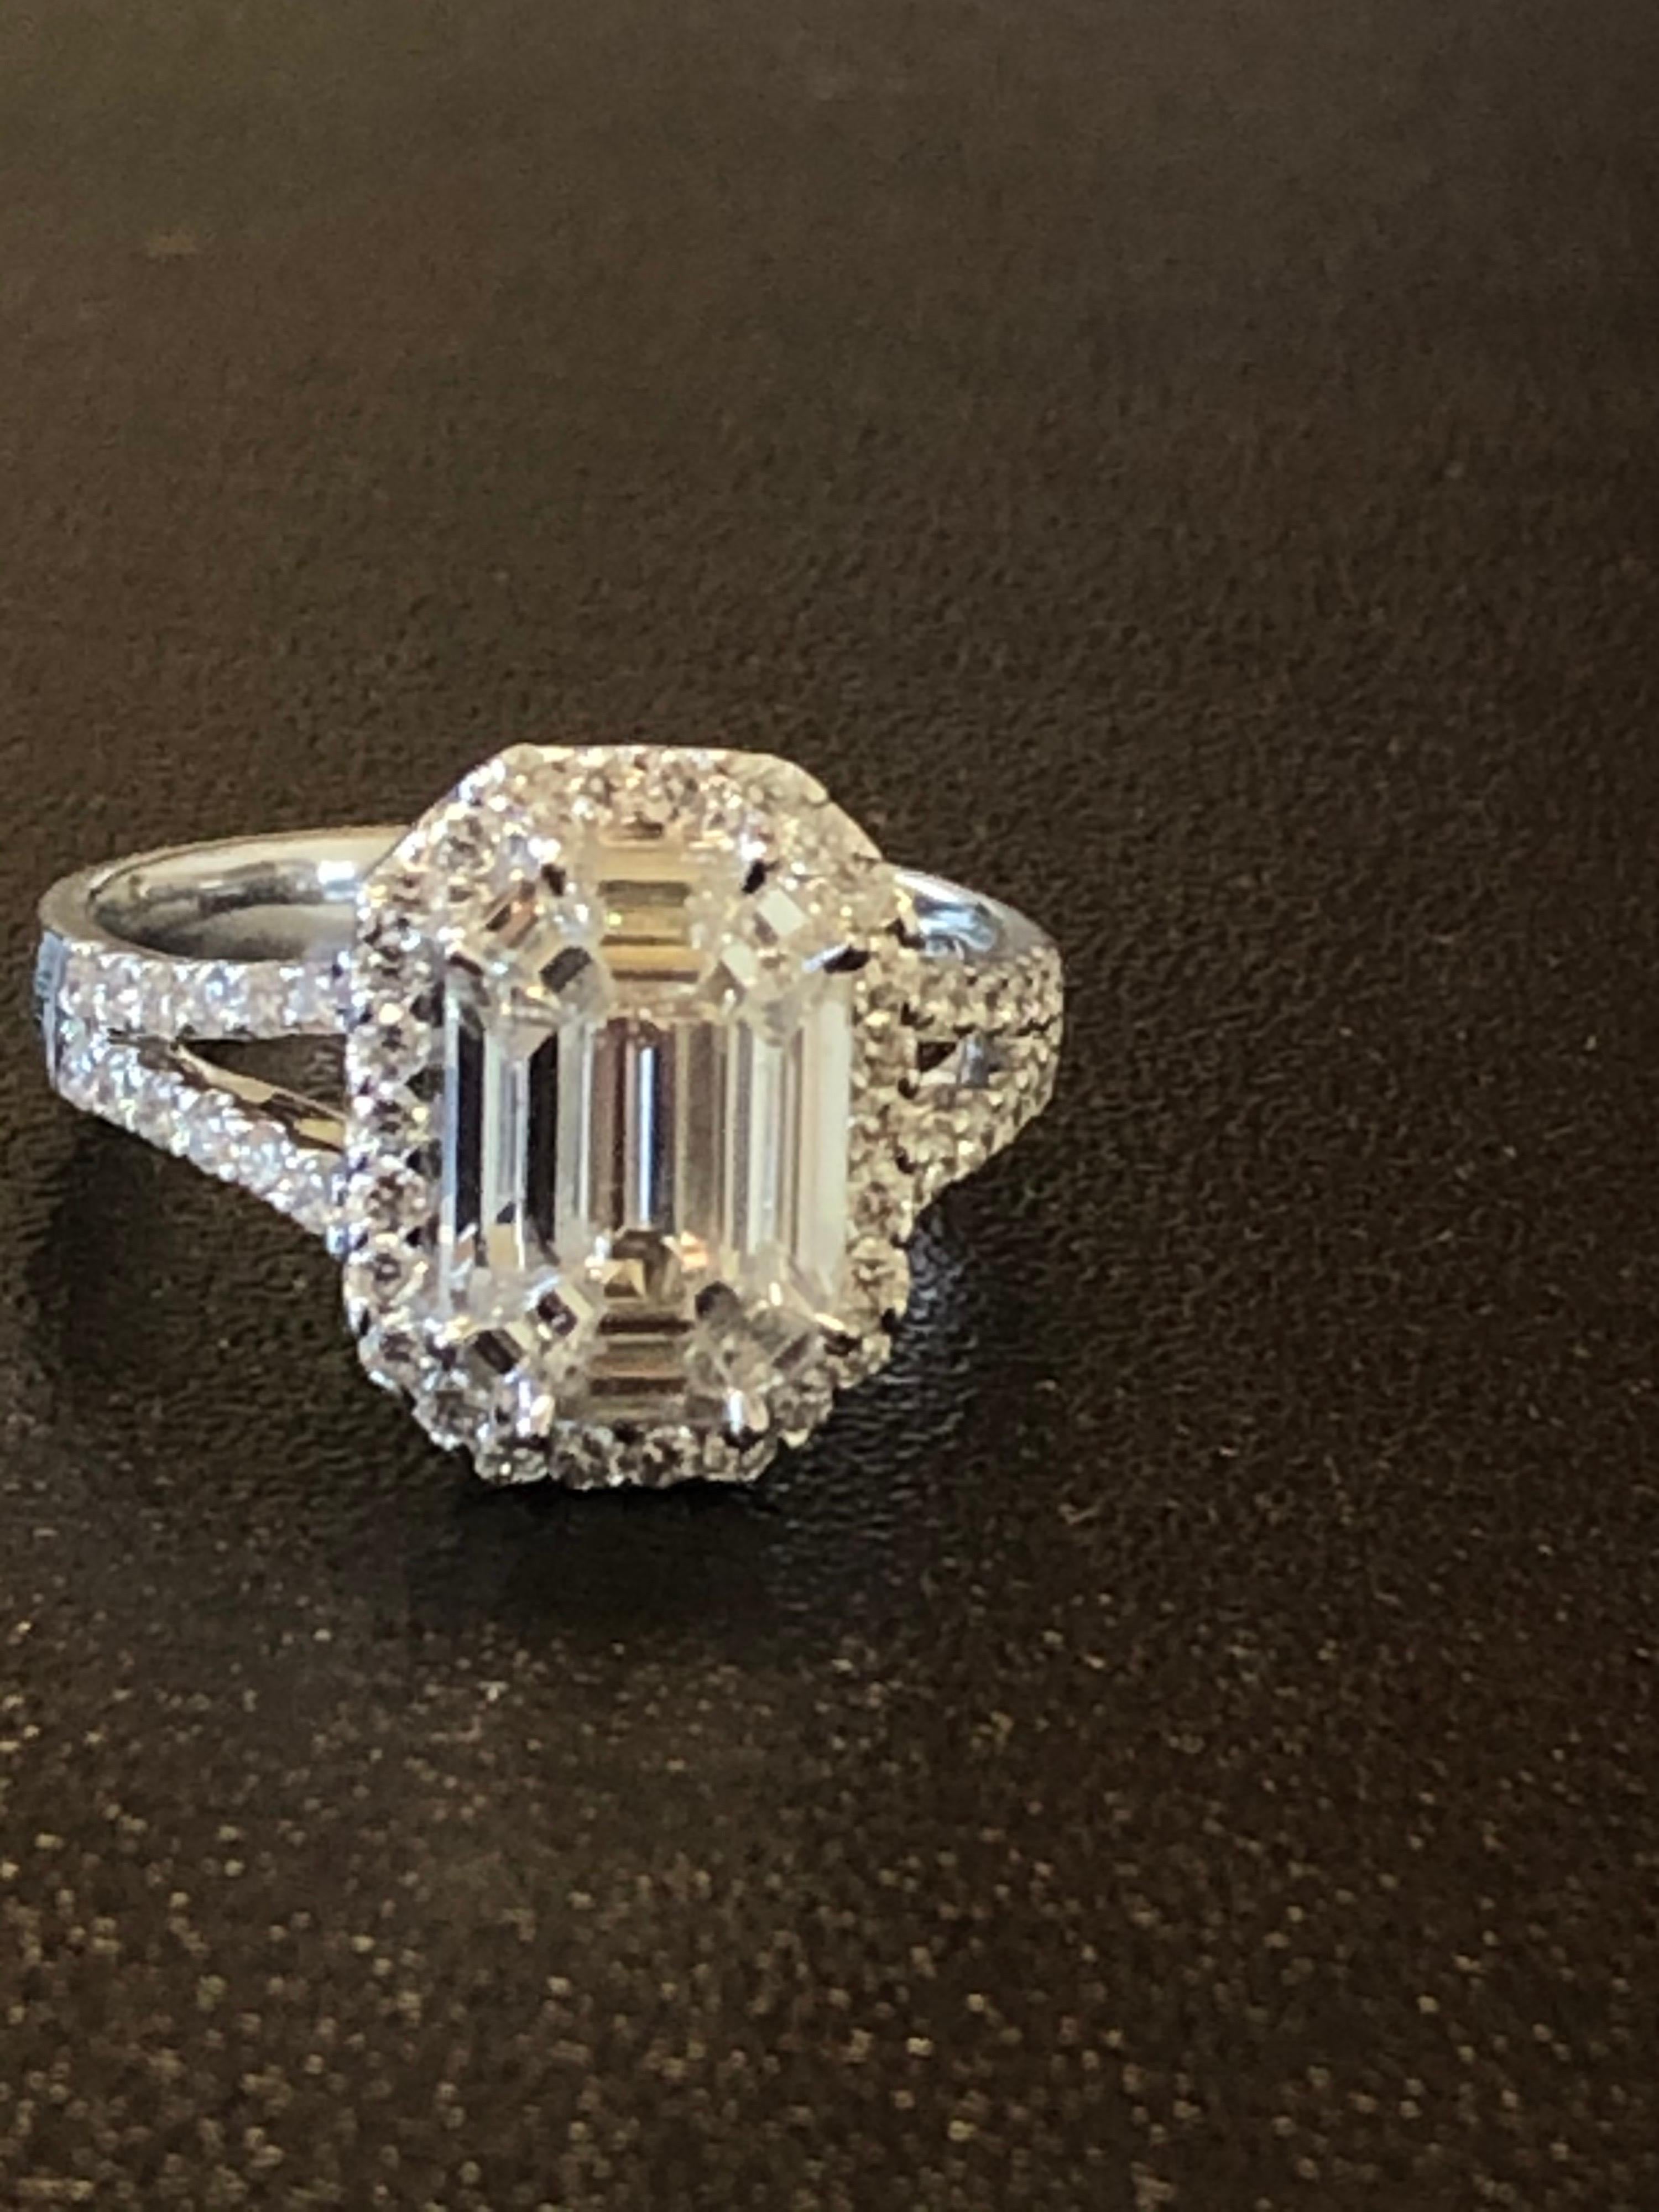 Baguette, Emerald, and Trapezoid shaped diamonds set in an illusion to create the look of a 6.50 to 7 carat single emerald cut stone. The ring is set with a halo of round diamonds and to the side of the ring. The ring is set in 18K white gold. The